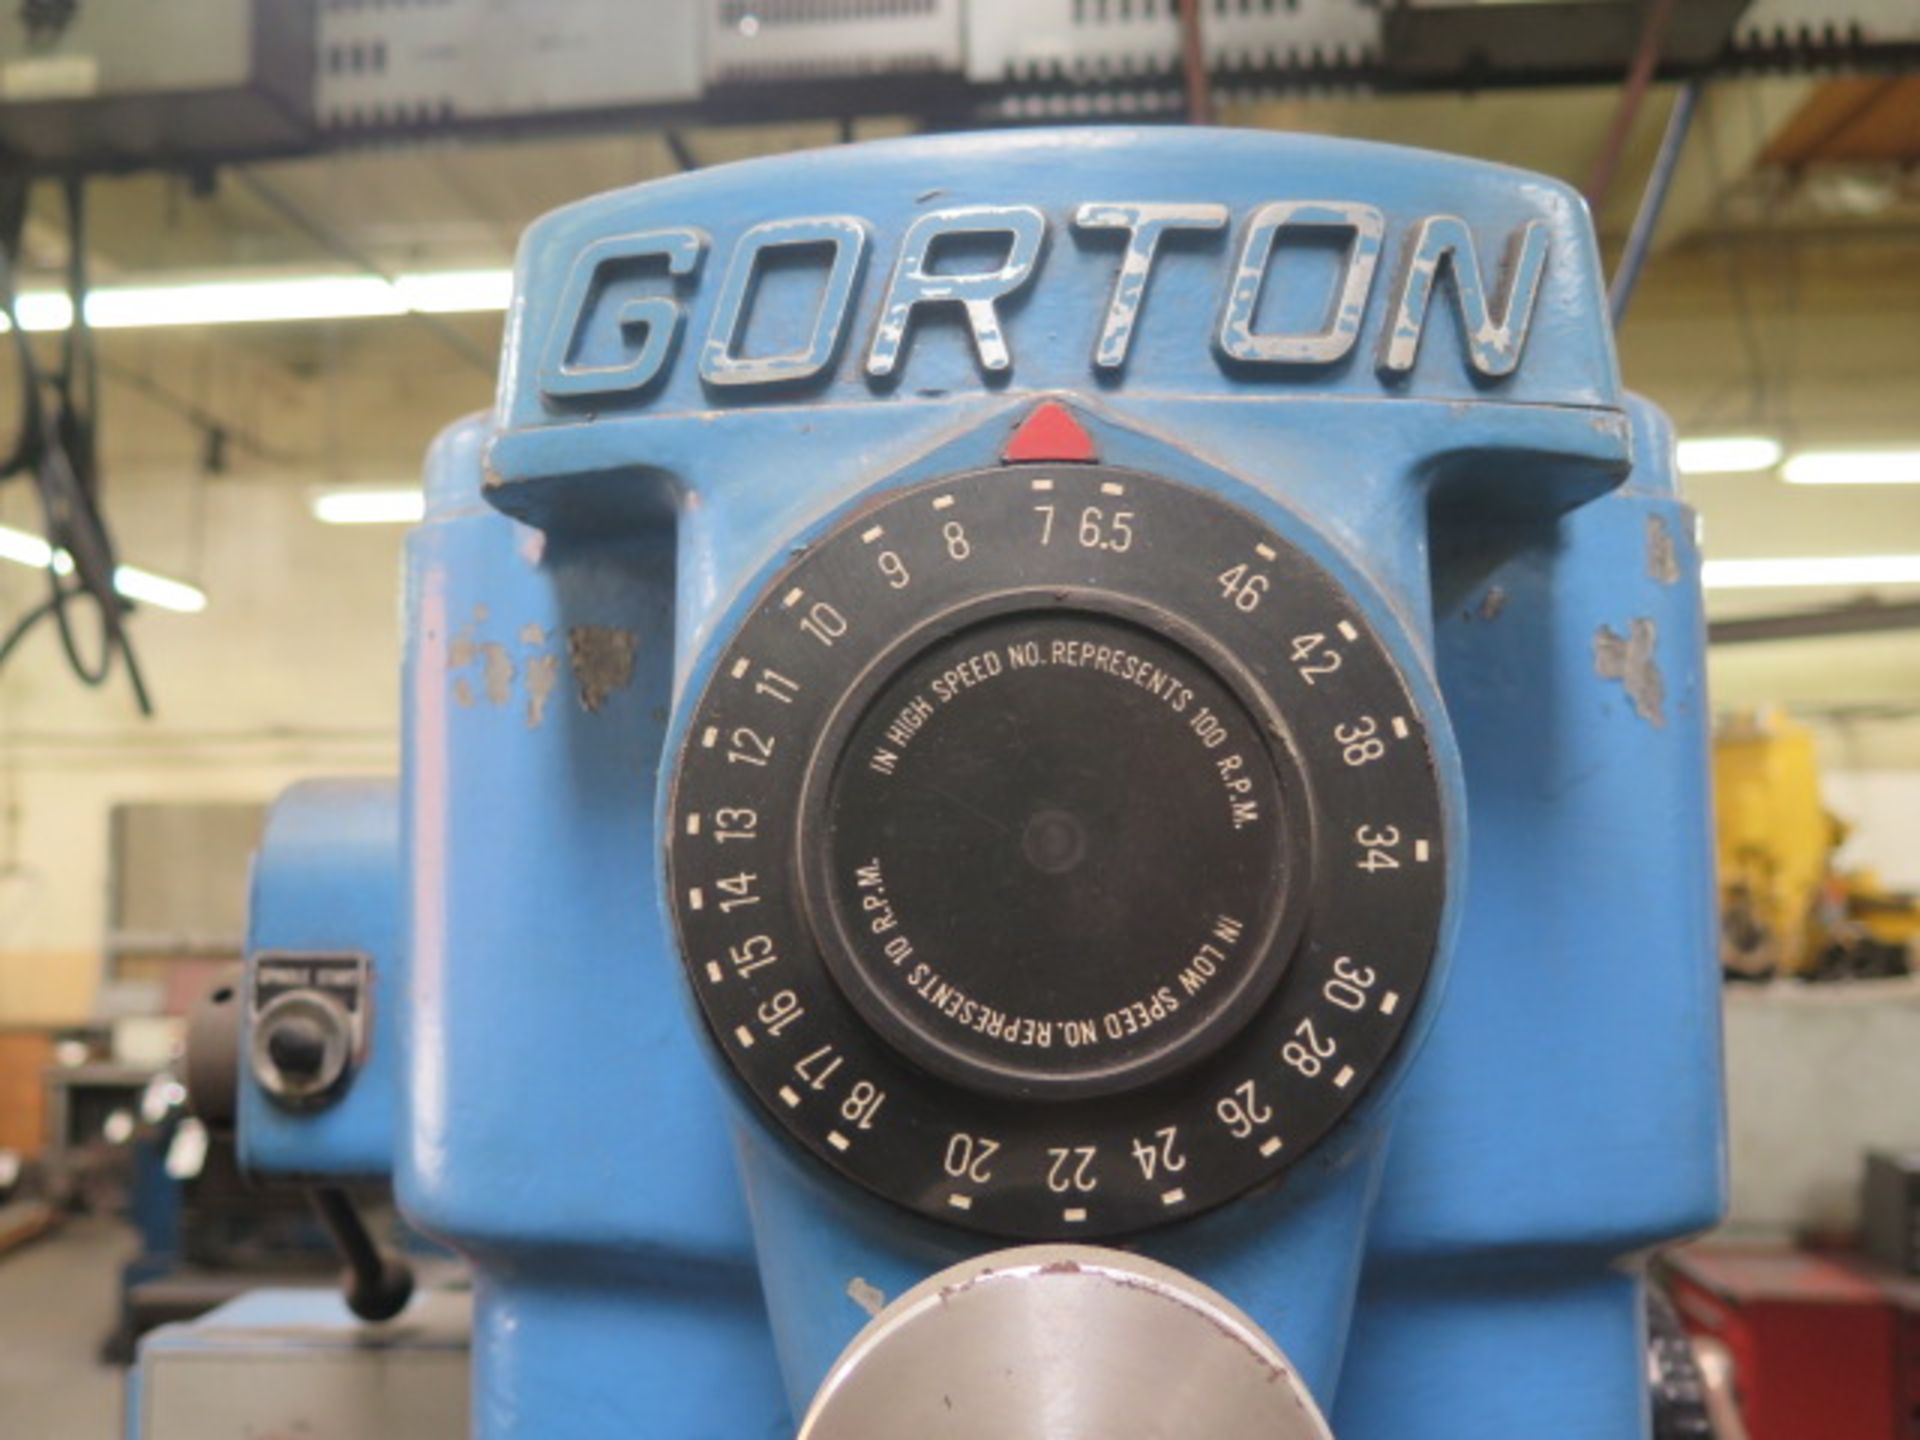 Gorton “Mastermill” mdl. 1-22 Vertical Mill w/ 650-4600 Dial Change RPM, 40-Taper Spindle, Box Ways, - Image 5 of 10